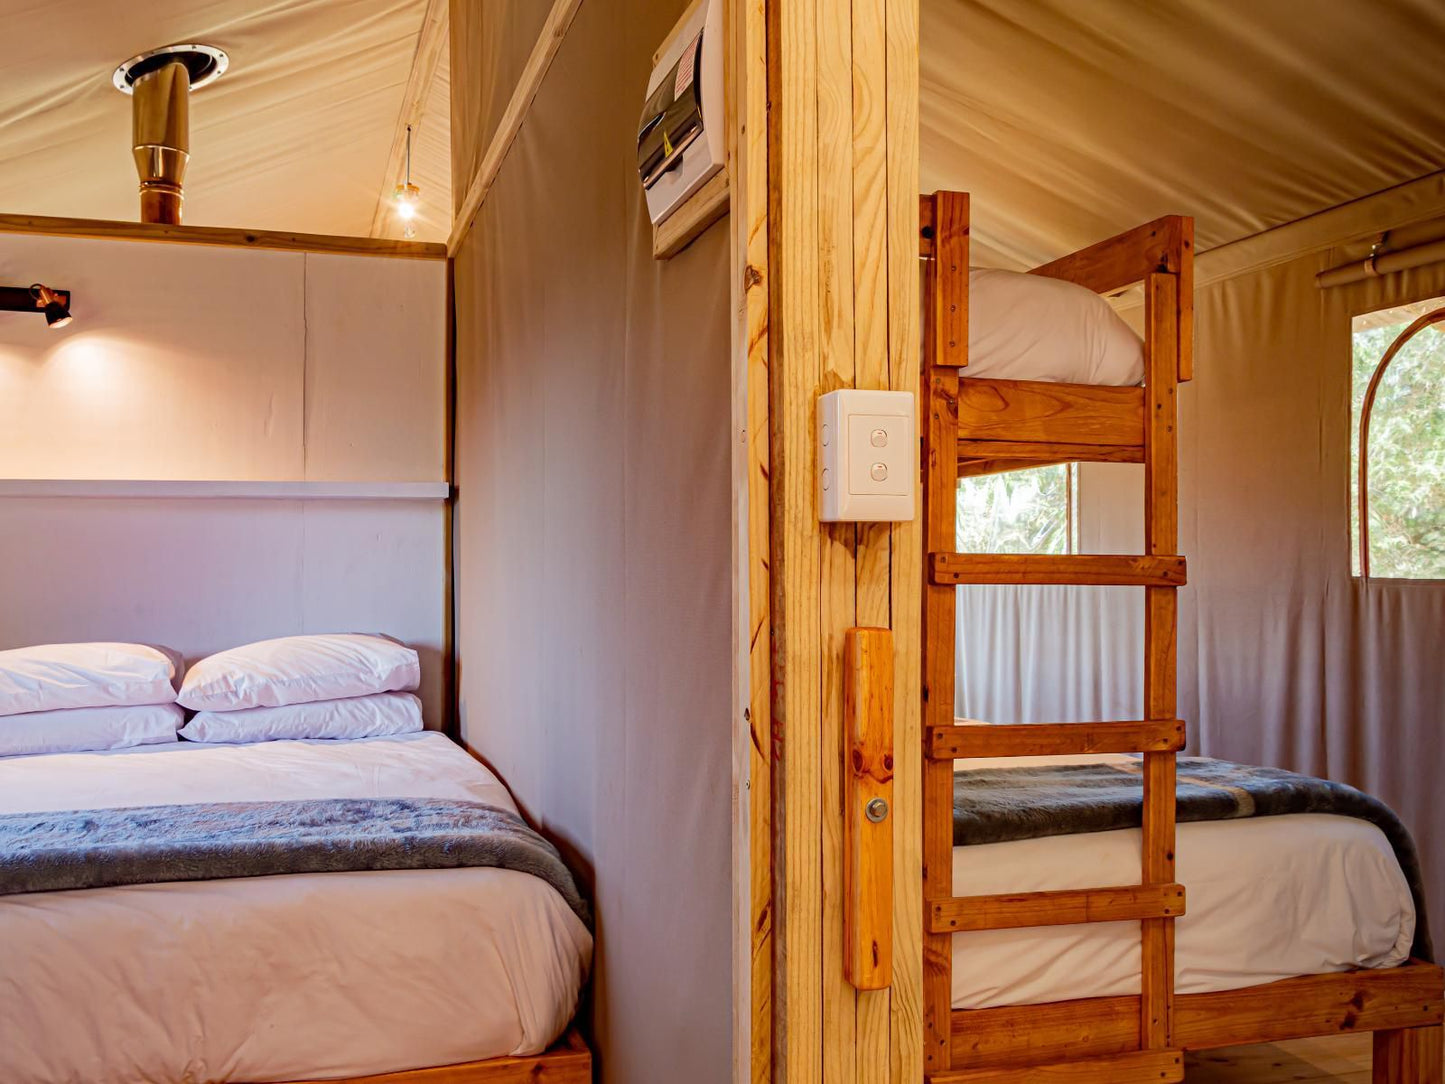 Africamps At Pat Busch Robertson Western Cape South Africa Tent, Architecture, Bedroom